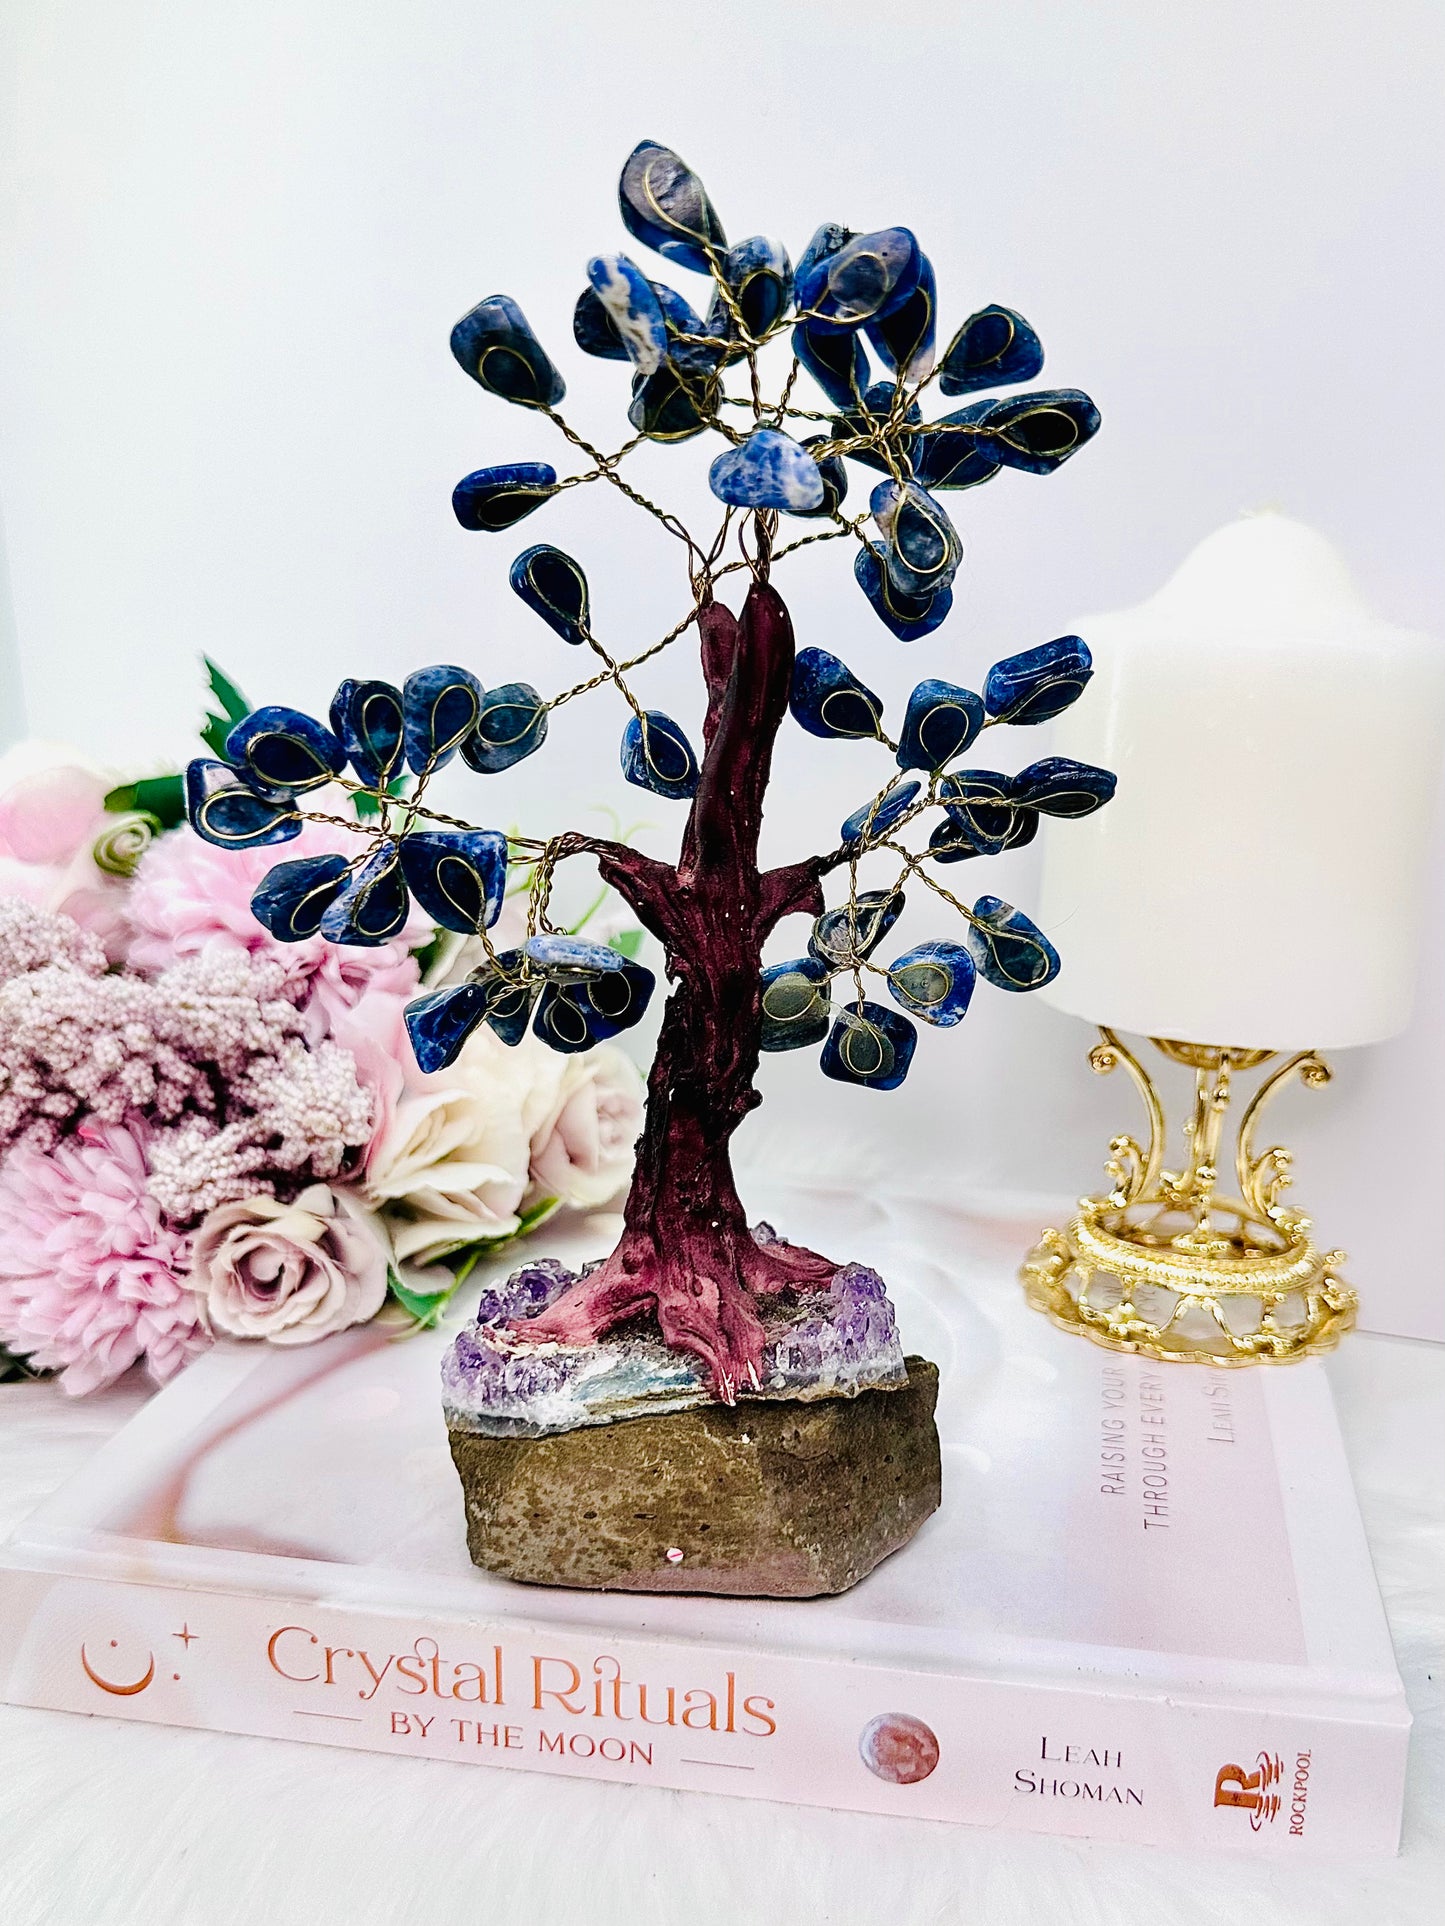 Order & Calmness To The Mind ~ Beautiful Large 20cm Sodalite Crystal Tree On Druzy Amethyst Slab From Brazil